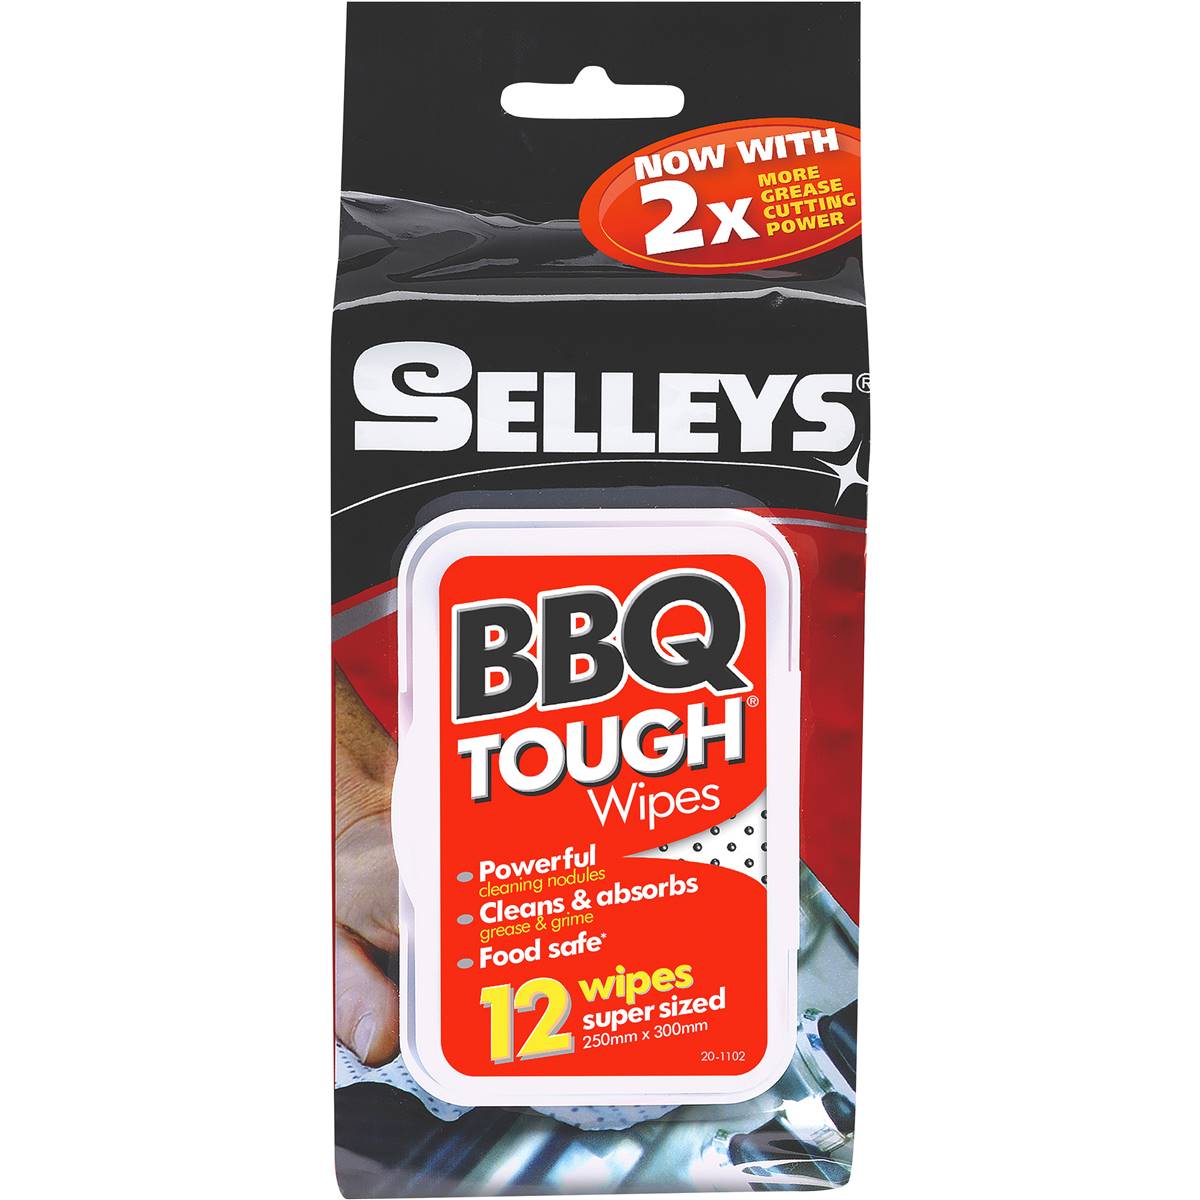 Selleys BBQ Tough Wipes 12 Pack